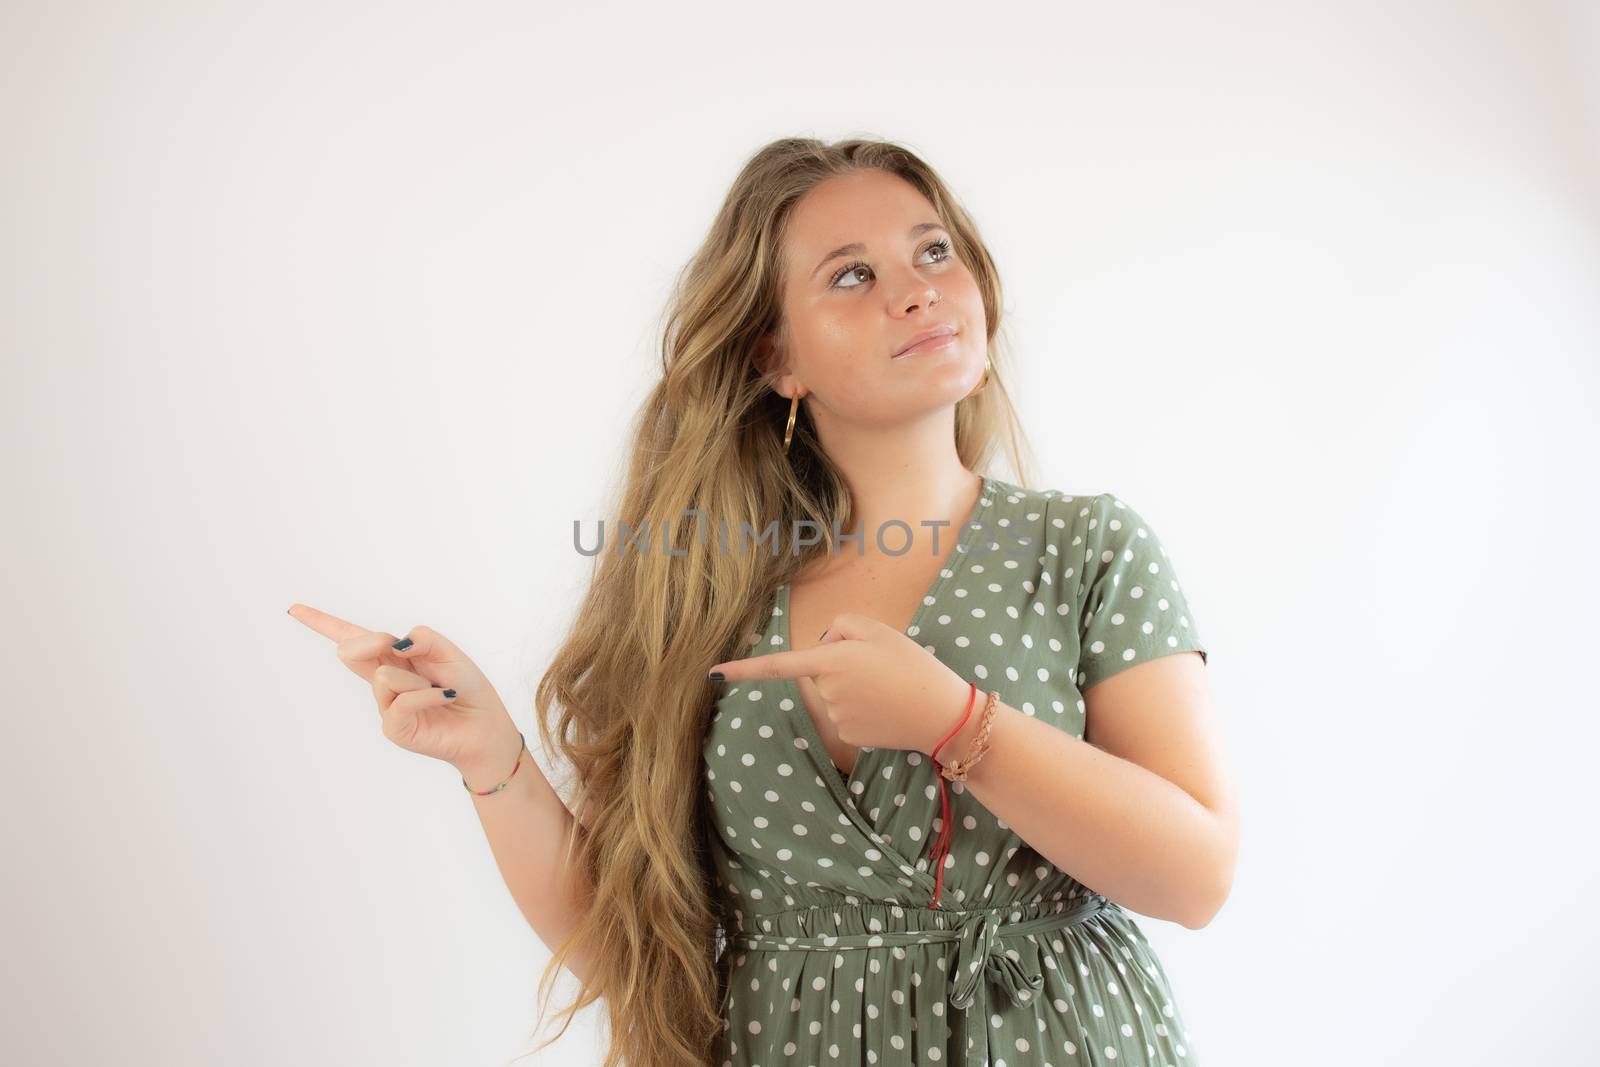 Beautiful young girl with long hair and smiling face and pointing with her fingers